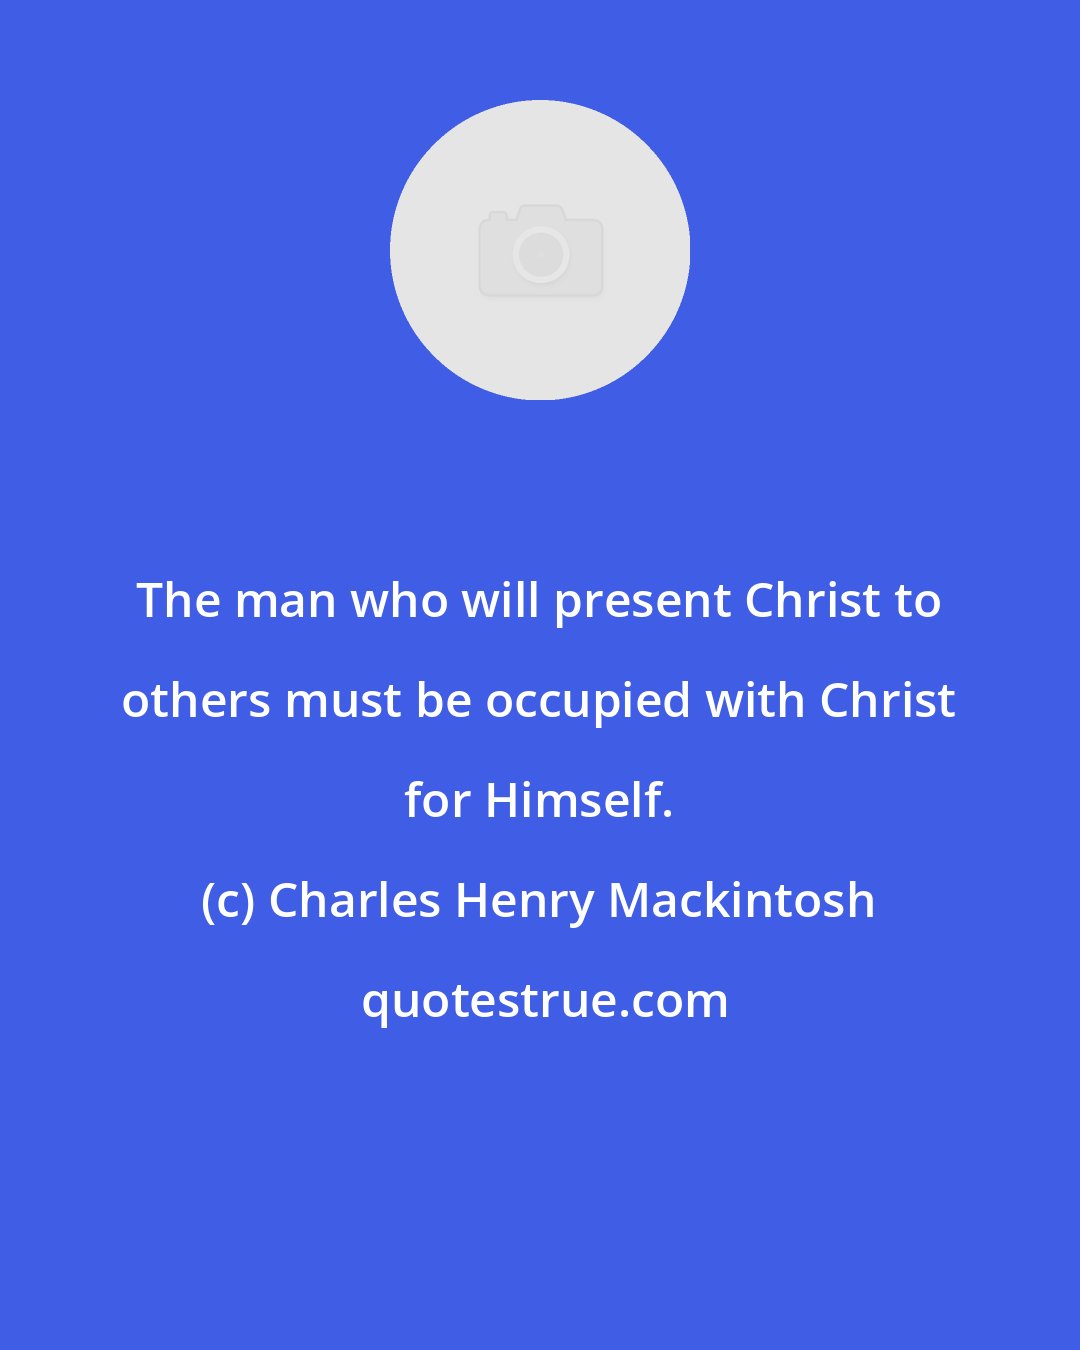 Charles Henry Mackintosh: The man who will present Christ to others must be occupied with Christ for Himself.